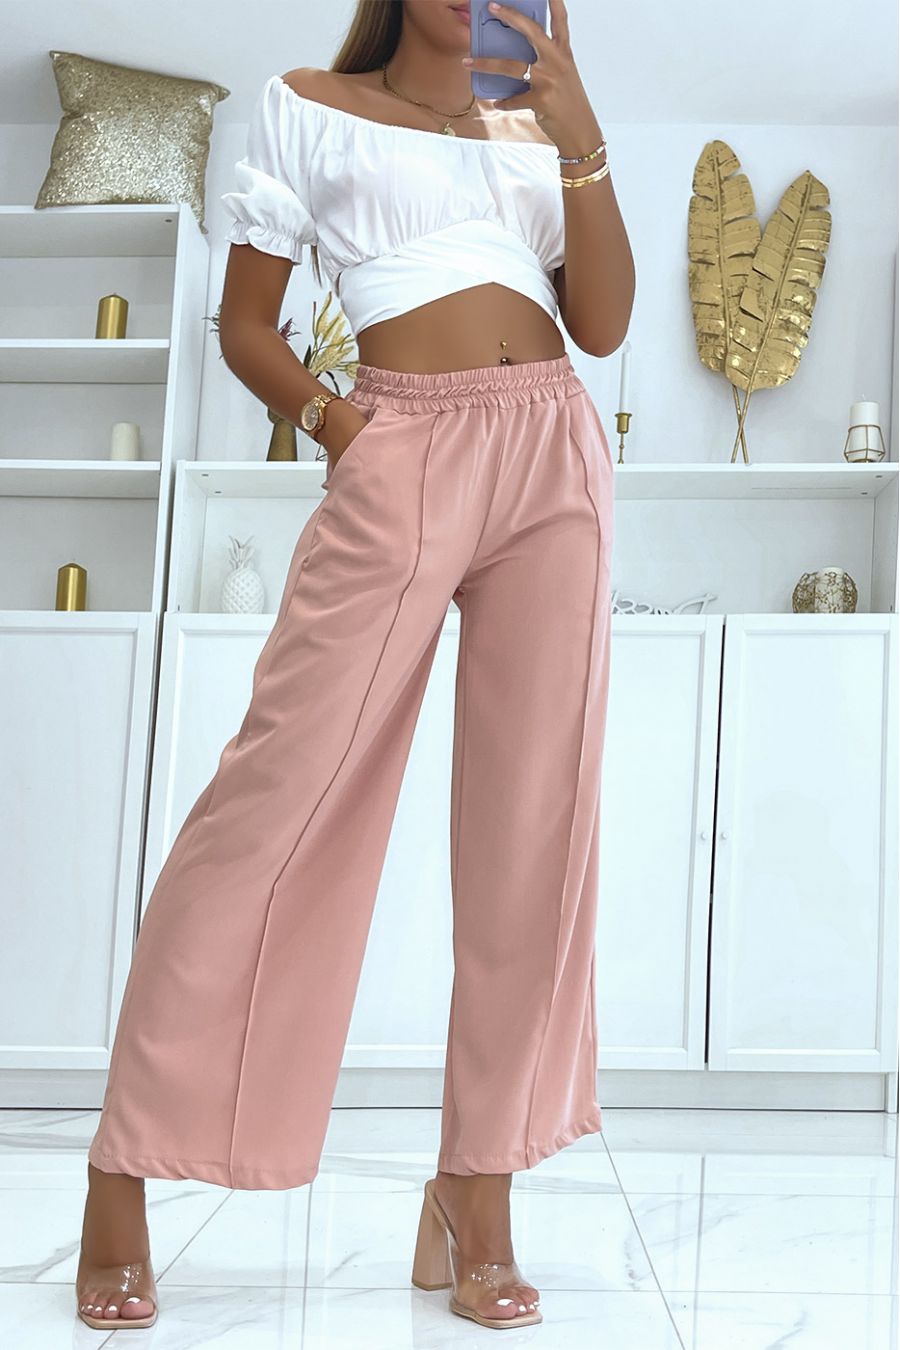 https://grossiste-media.com/251991-large_default/light-and-comfortable-pink-palazzo-pants.jpg